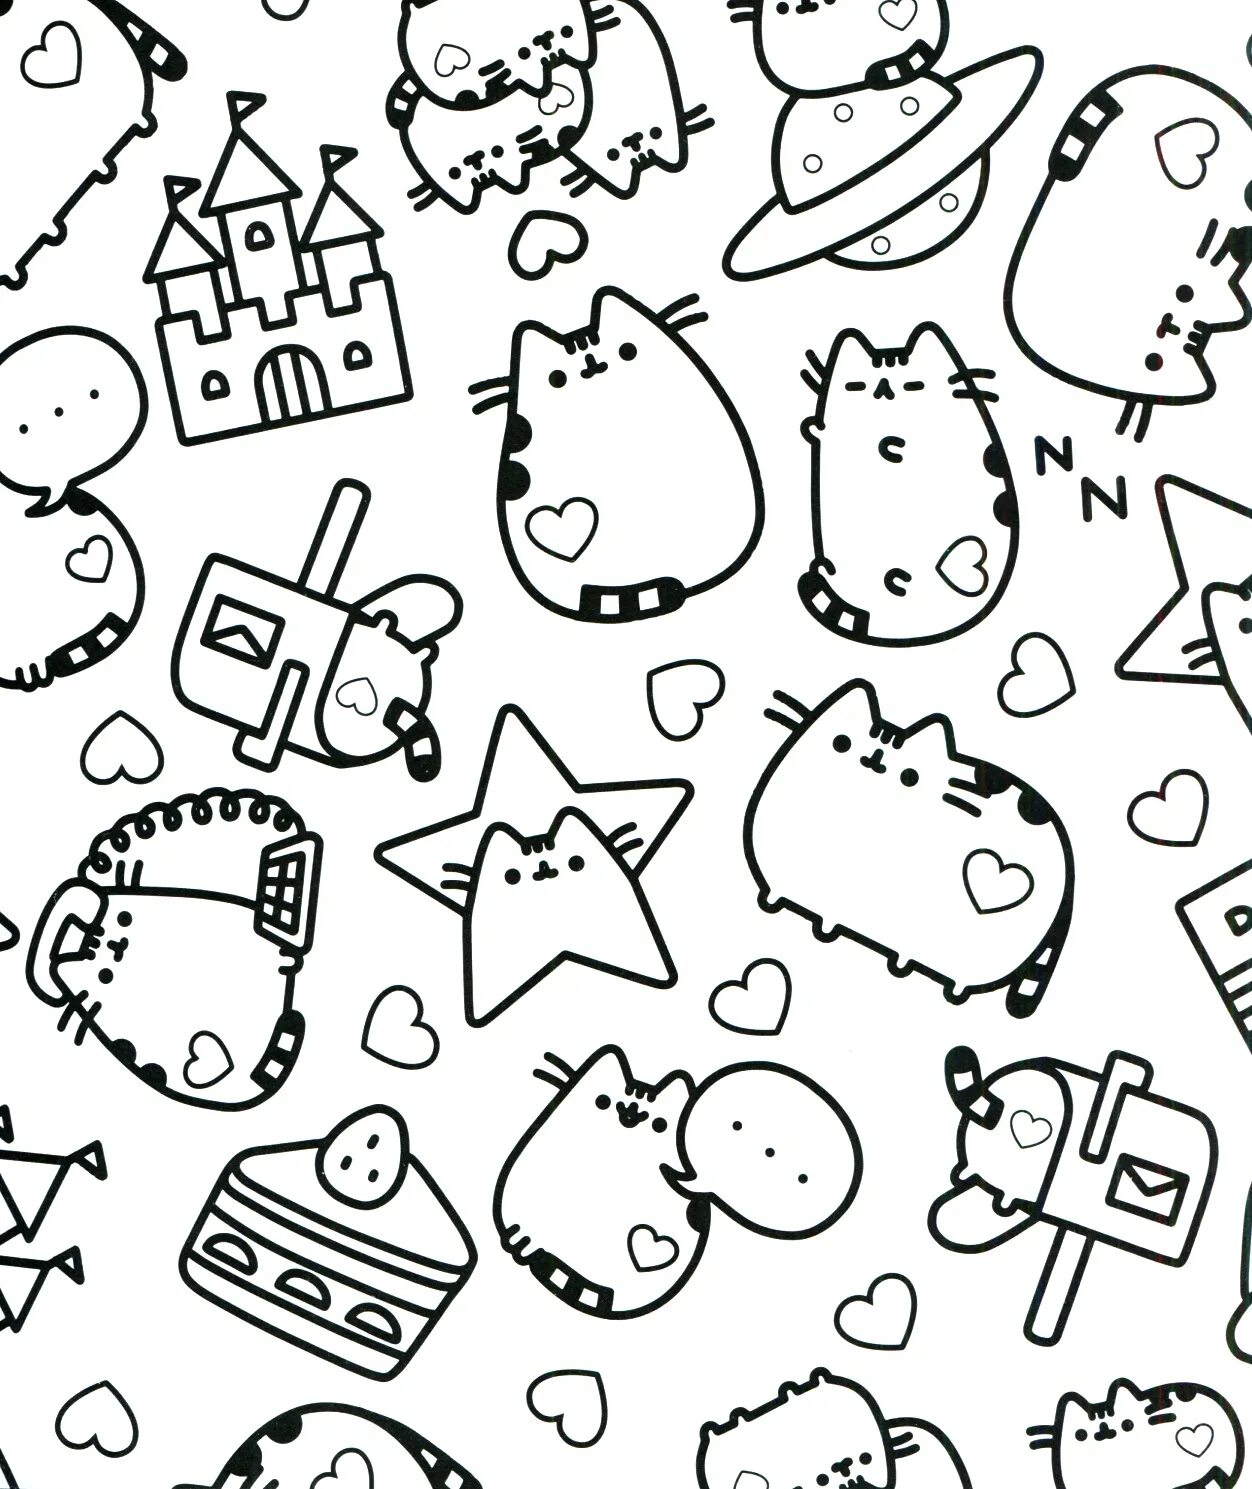 Coloring page of kind pusheen stickers